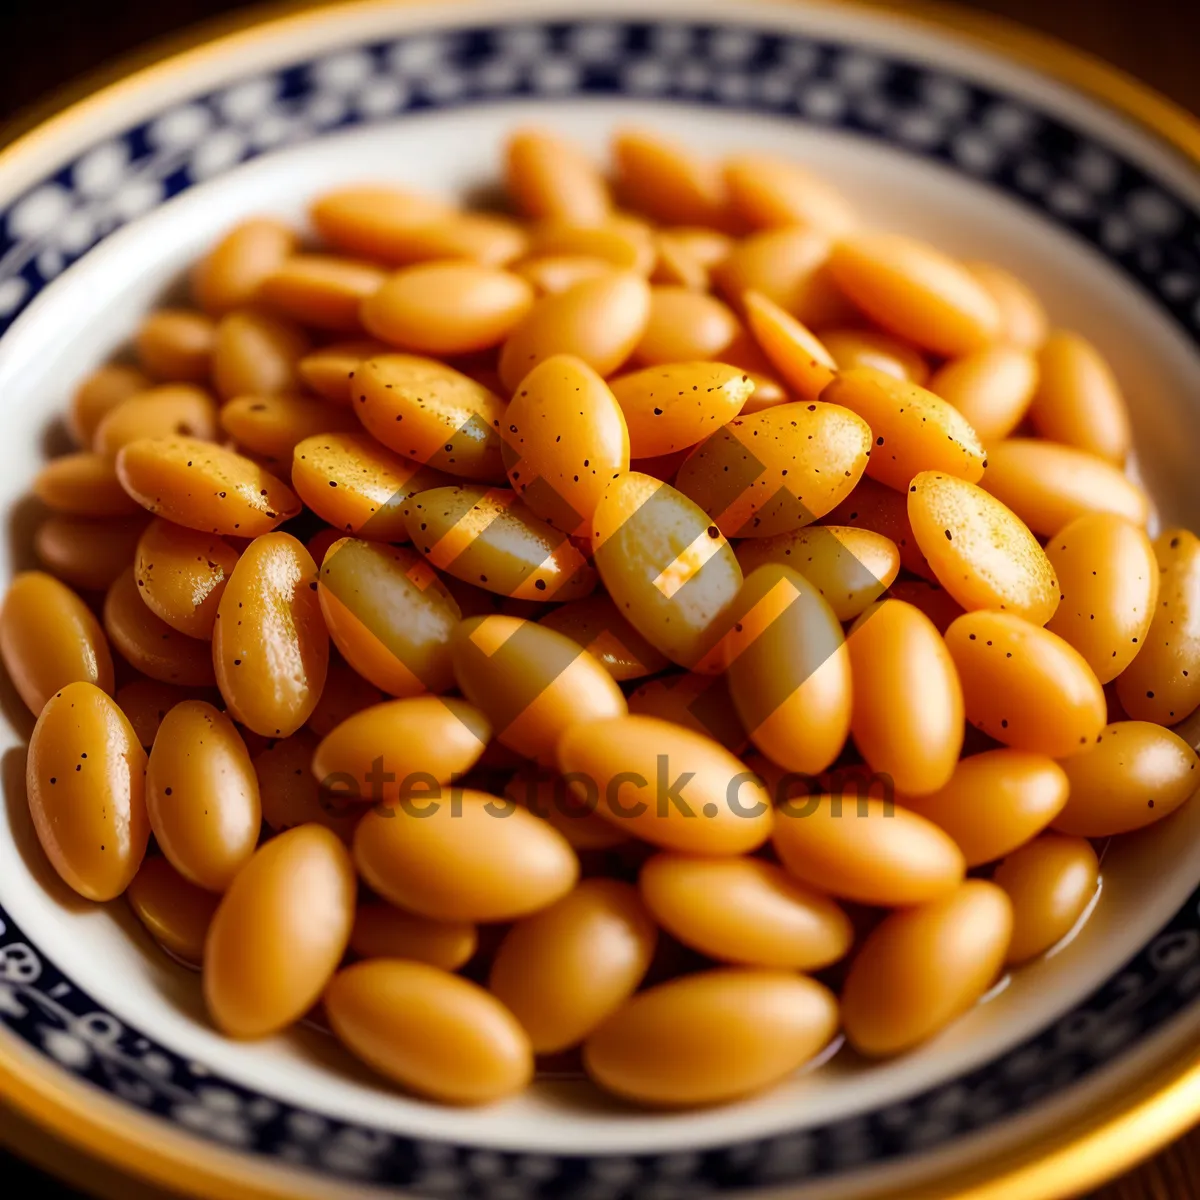 Picture of Nutritious Legume Medley: Beans, Peas, and Corn